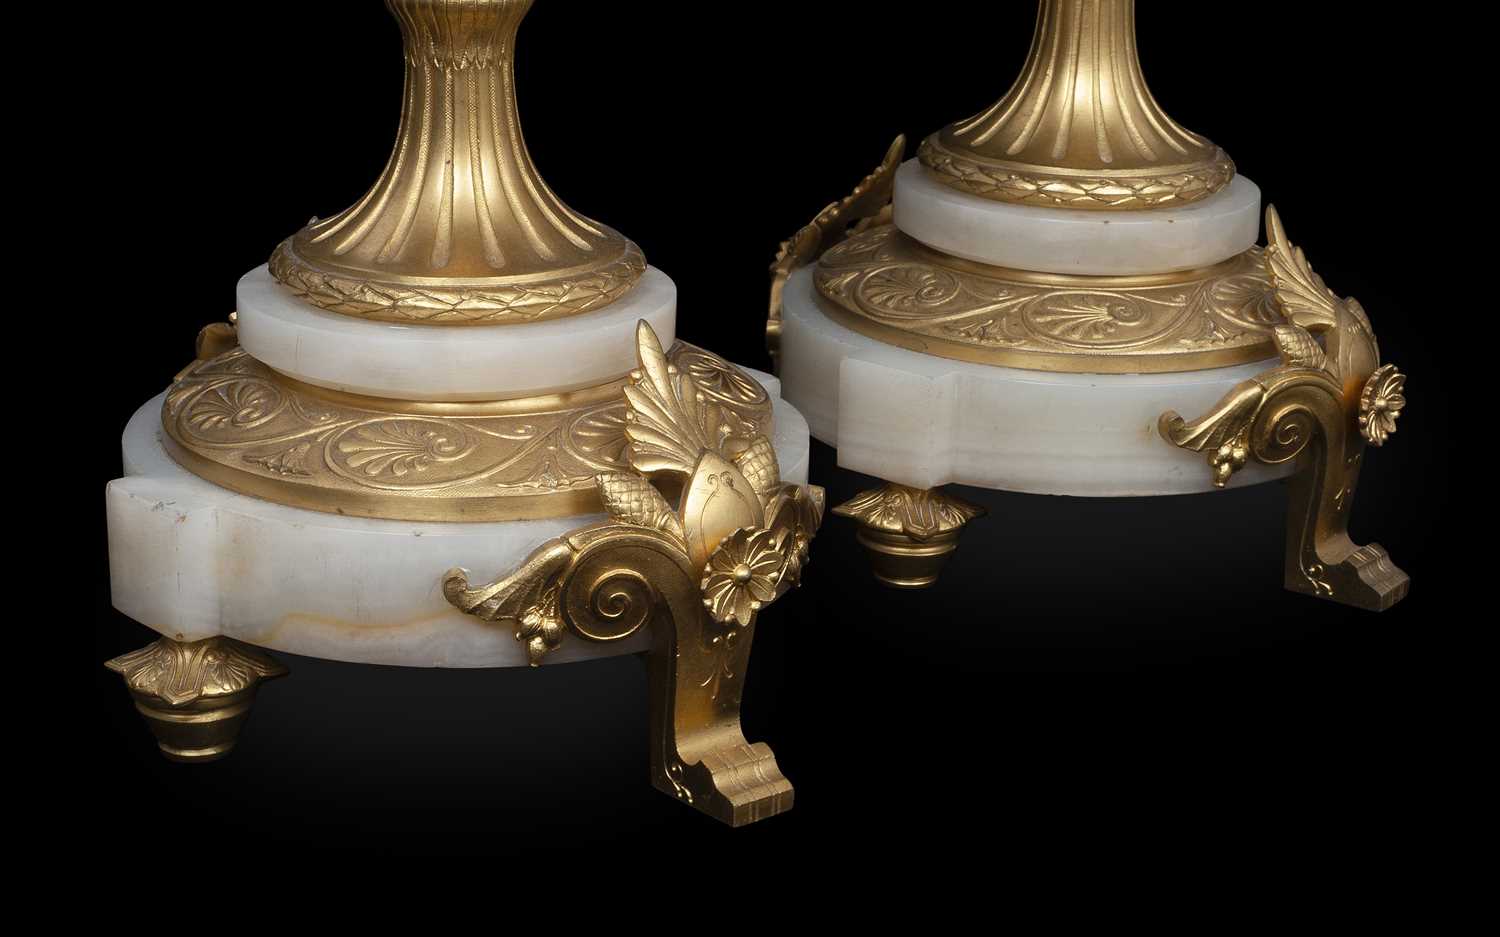 A FINE PAIR OF LATE 19TH CENTURY FRENCH GILT BRONZE AND ALGERIAN ONYX CANDELABRA - Image 4 of 4